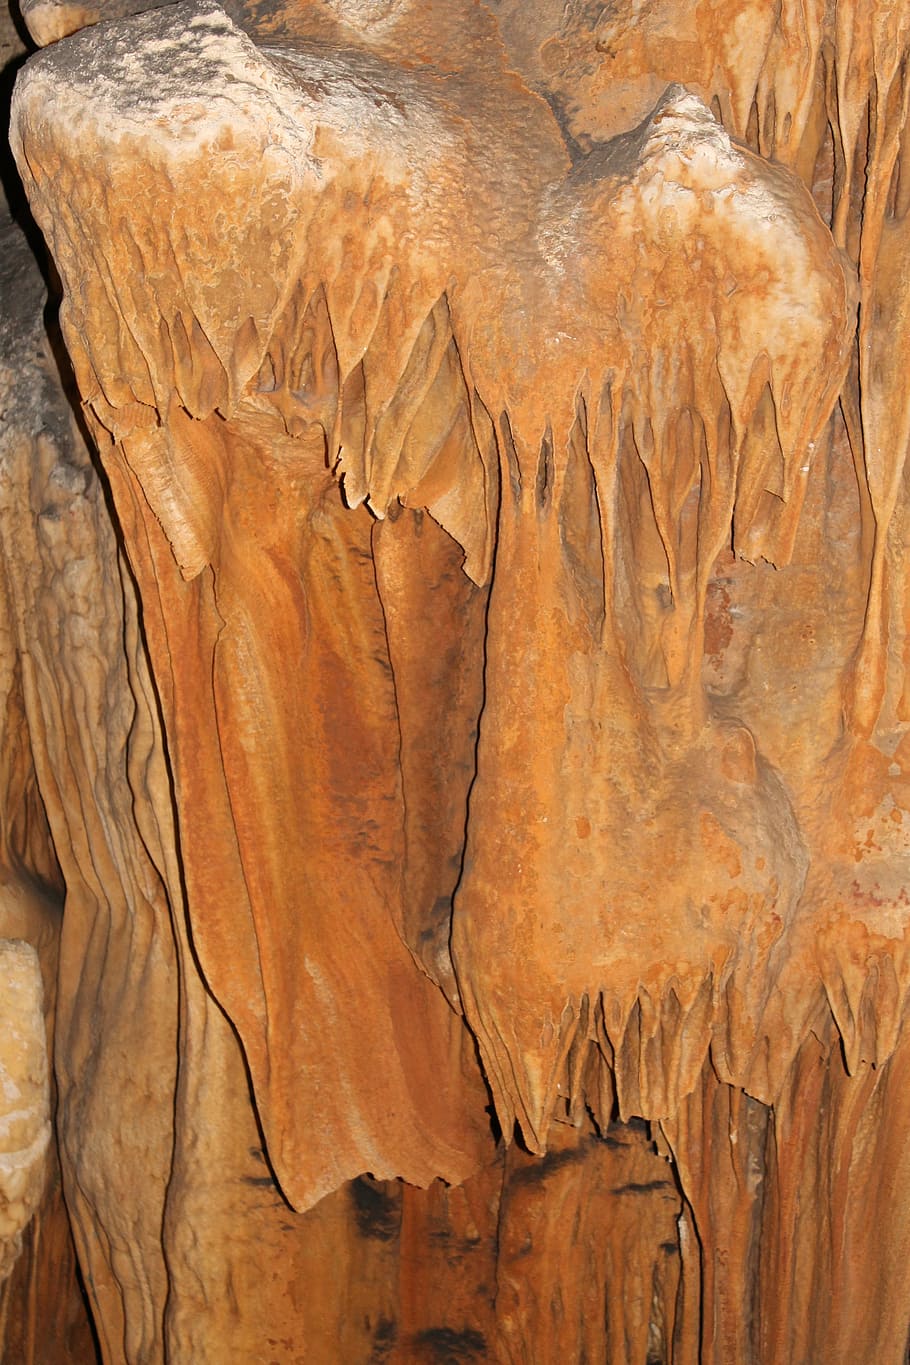 caves, bridesmaids, draped, prehistory, nature, wood - Material, backgrounds, pattern, brown, textured